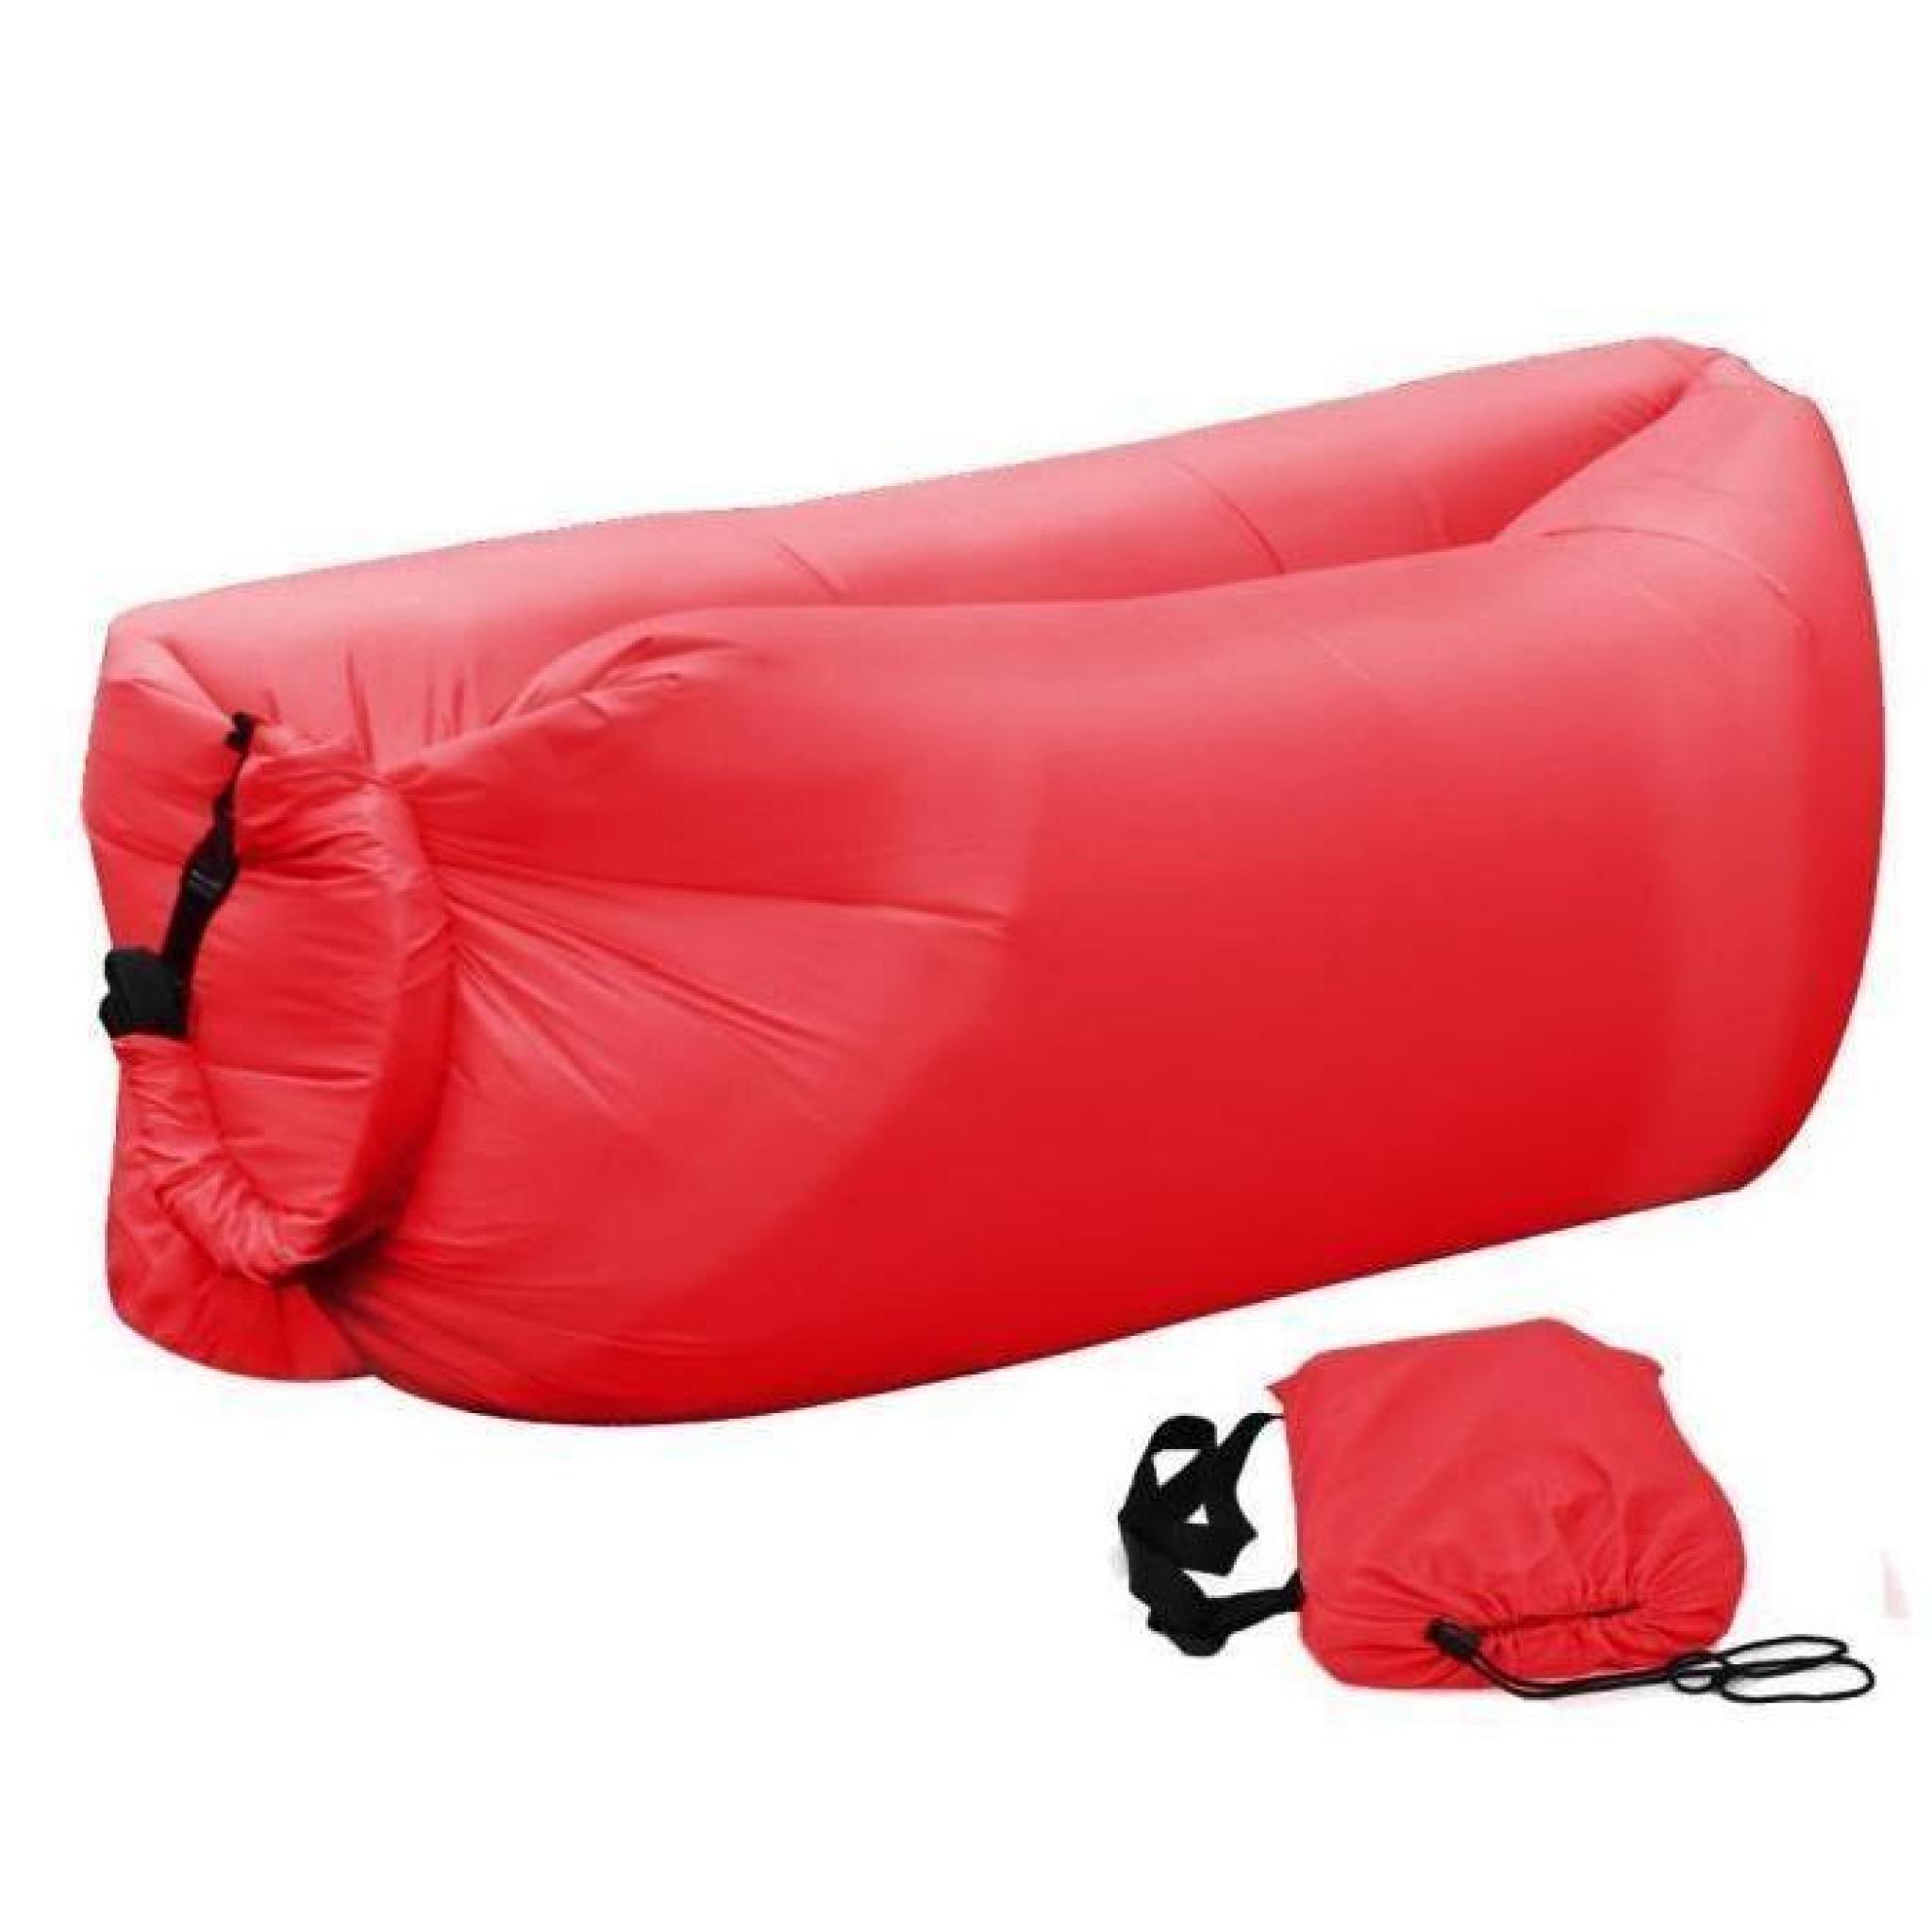 Rouge  Portable en plein air gonflable Canapé Sofa gonflable Lounger Air Sac housse pour barbecue Beach Camping pas cher